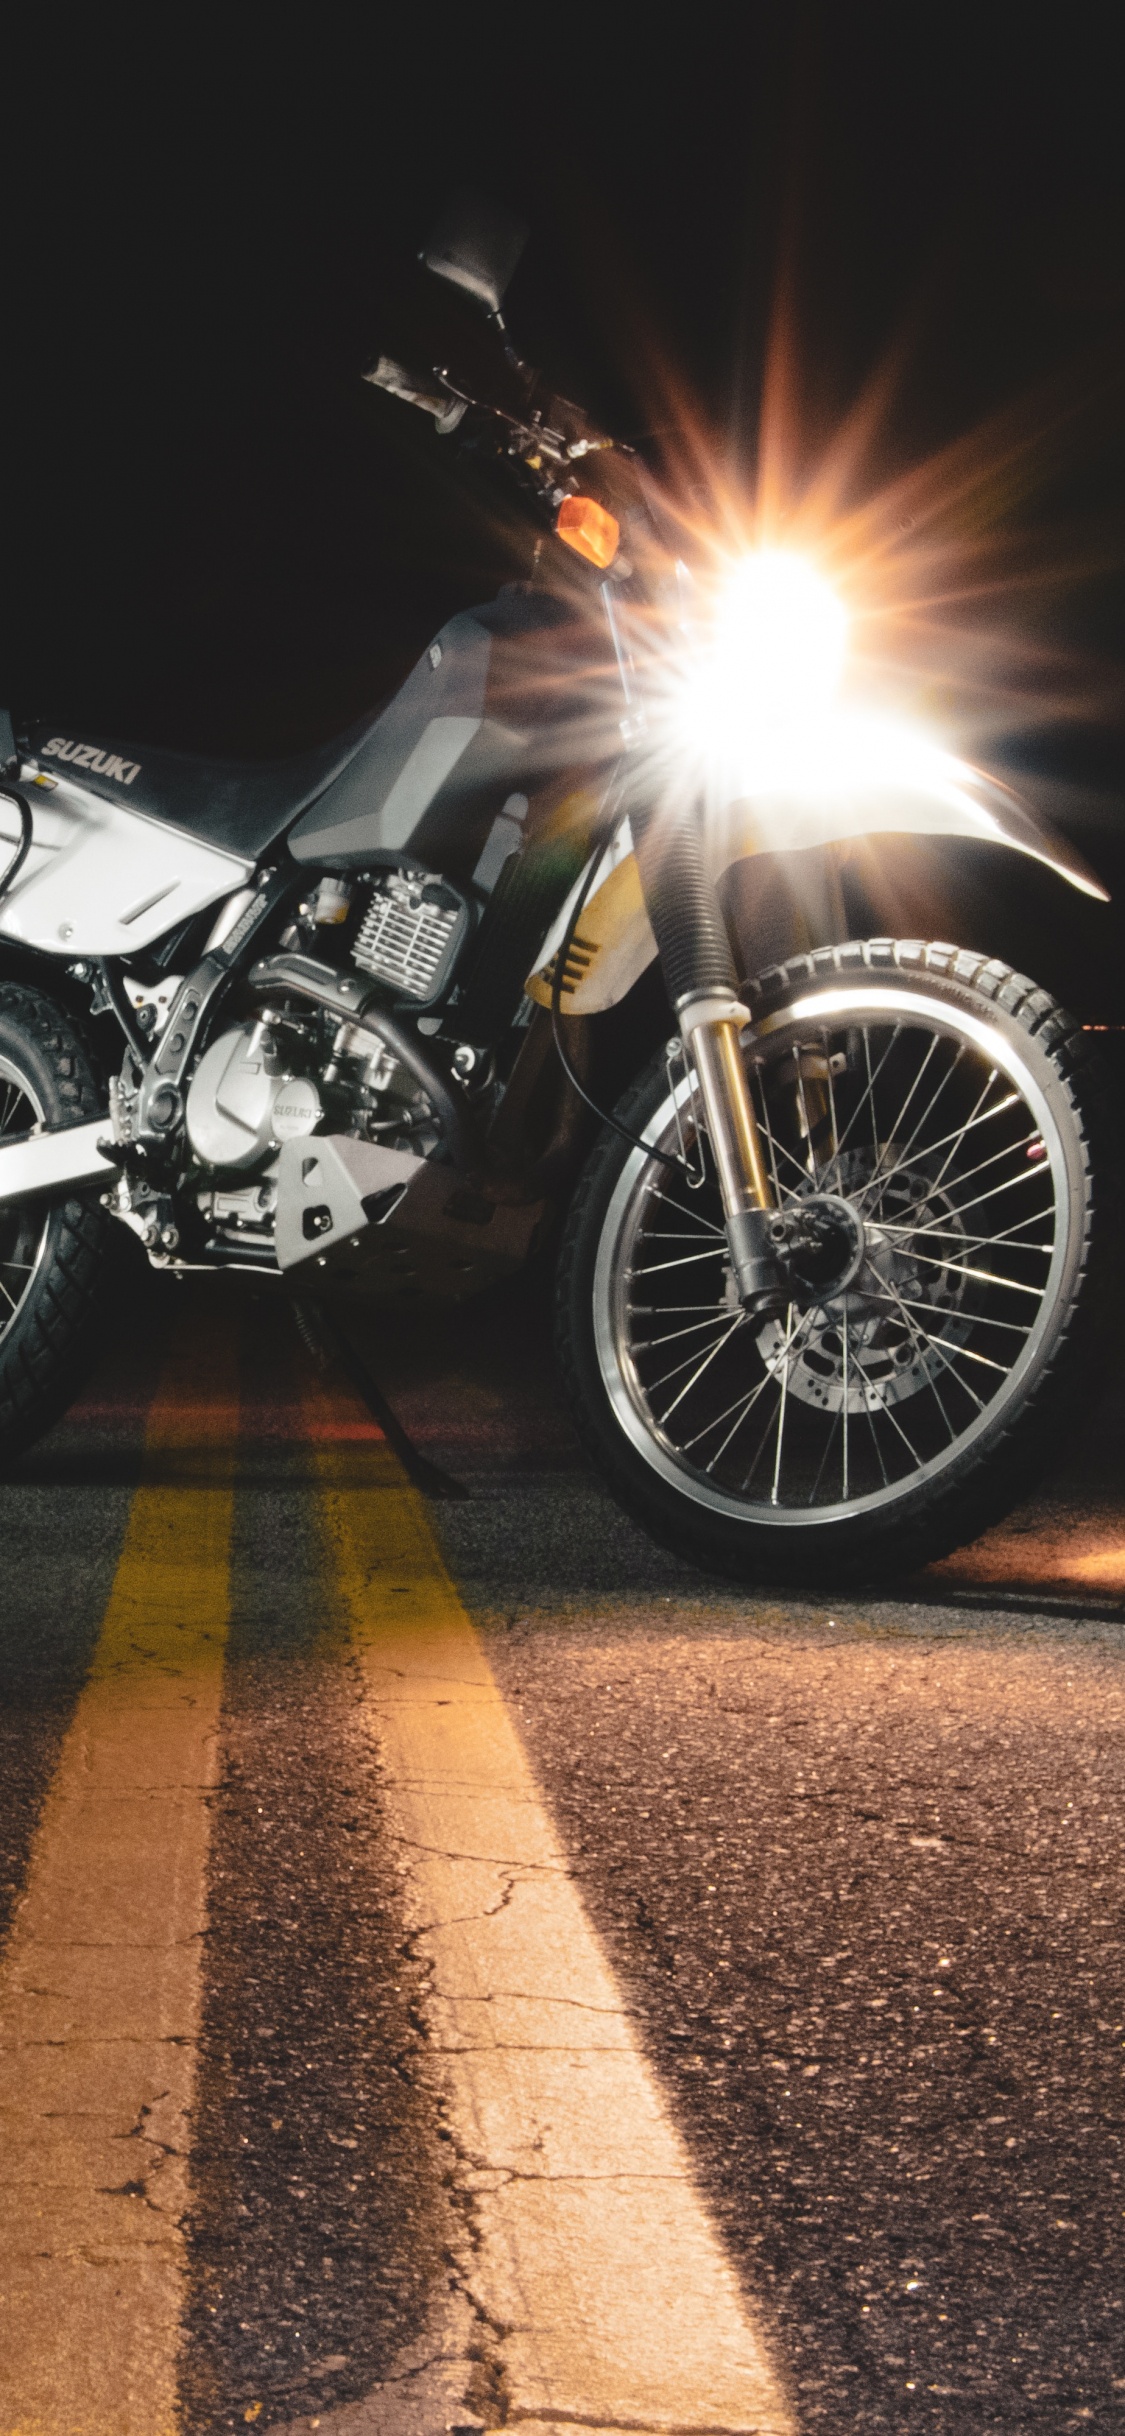 Black and Silver Motorcycle on Road During Night Time. Wallpaper in 1125x2436 Resolution